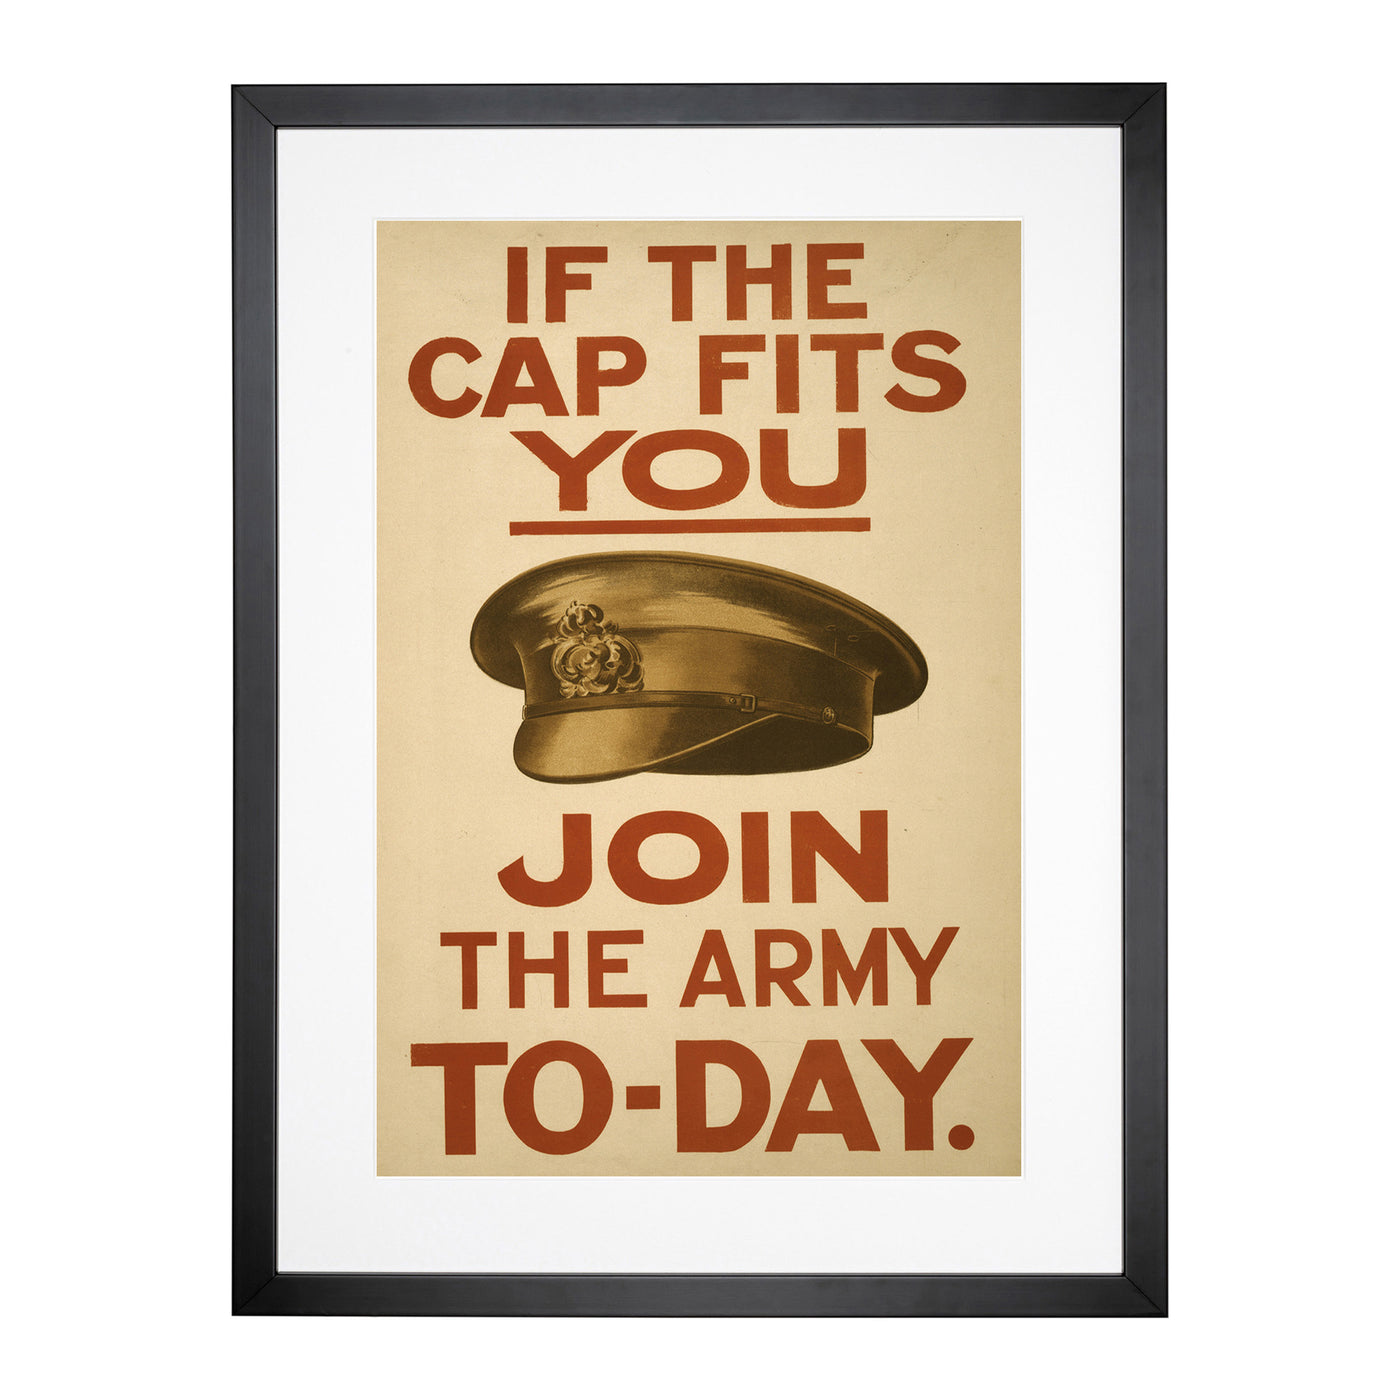 Vintage Join The Army Advertisement